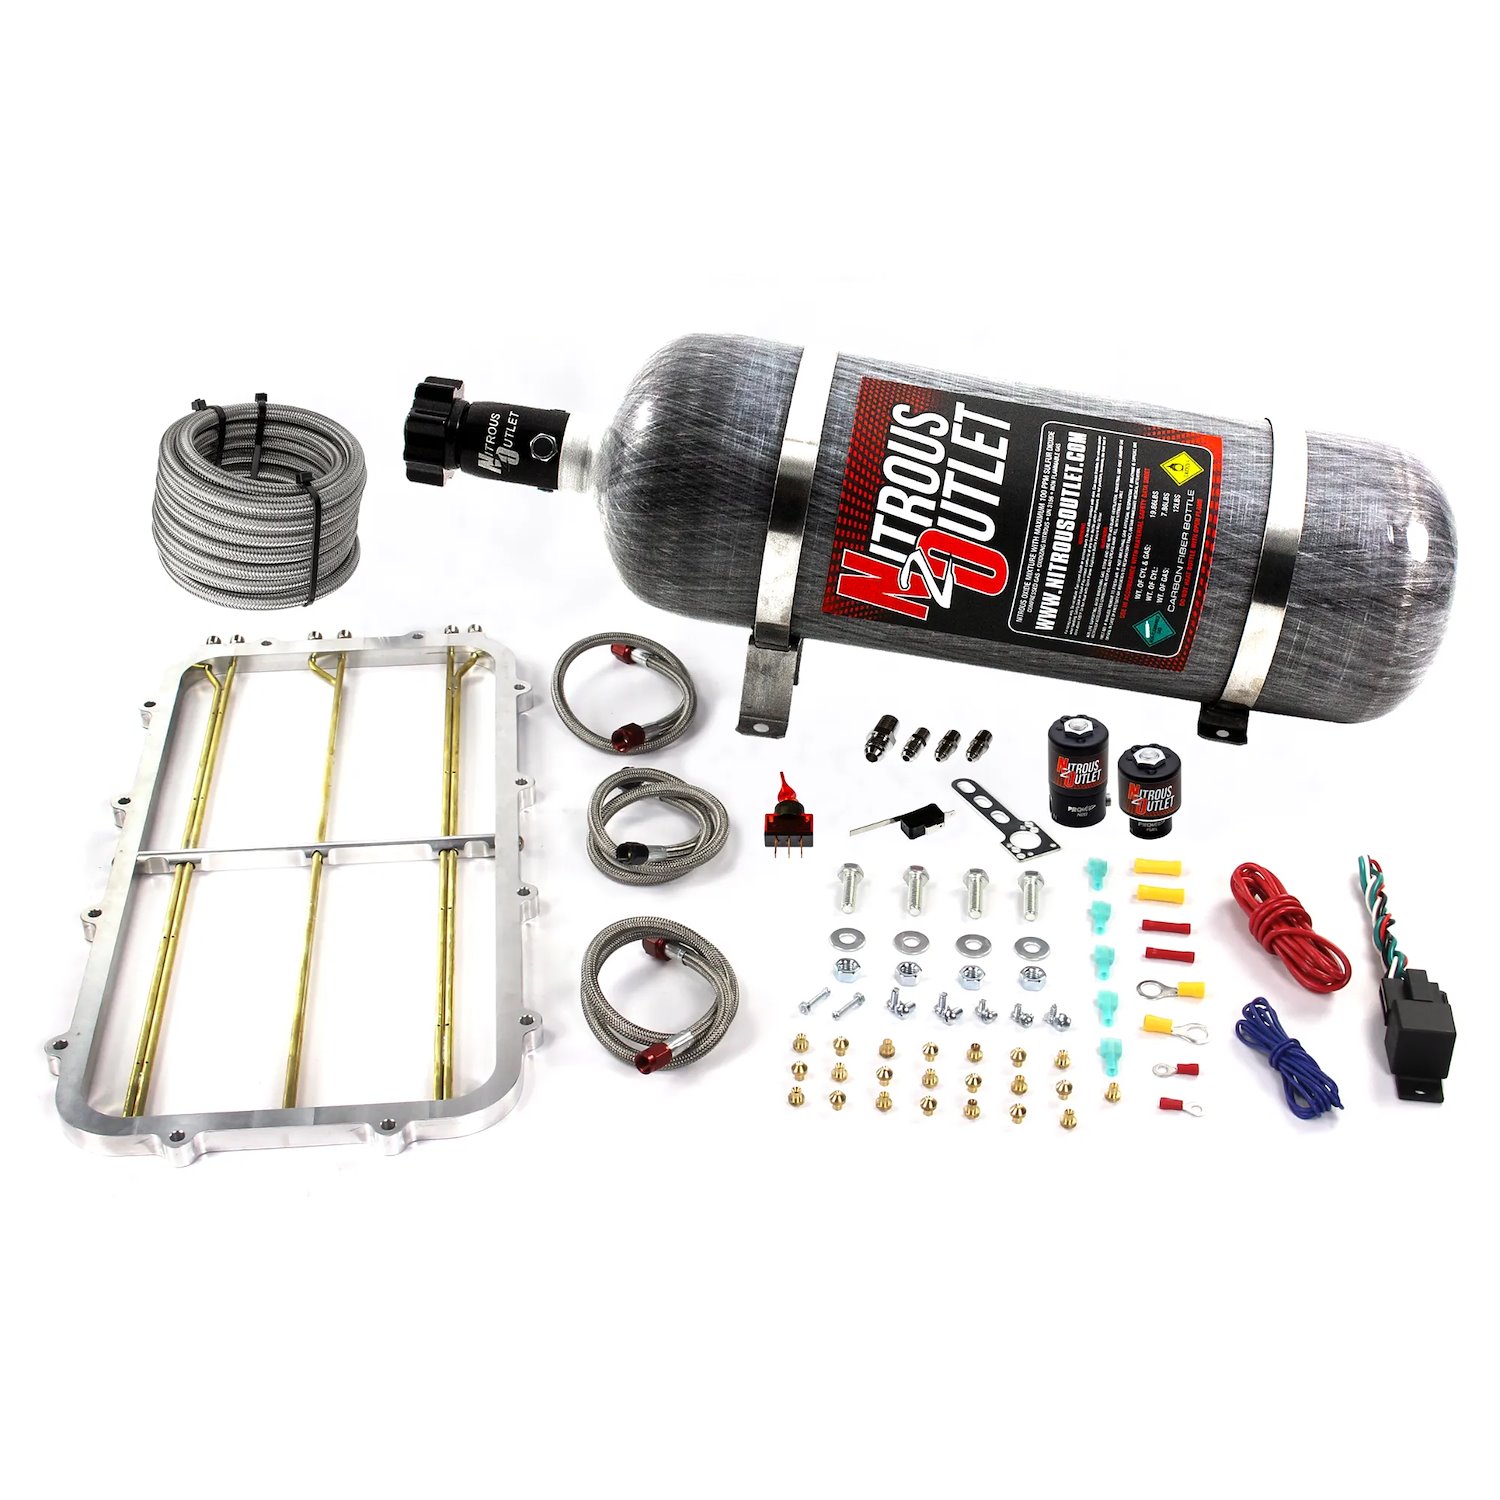 00-10183-12 GM Holley Hi-Ram Single Stage Intake Spacer Plate System, Gas/E85, 5-55psi, 50-300HP, 12lb Bottle